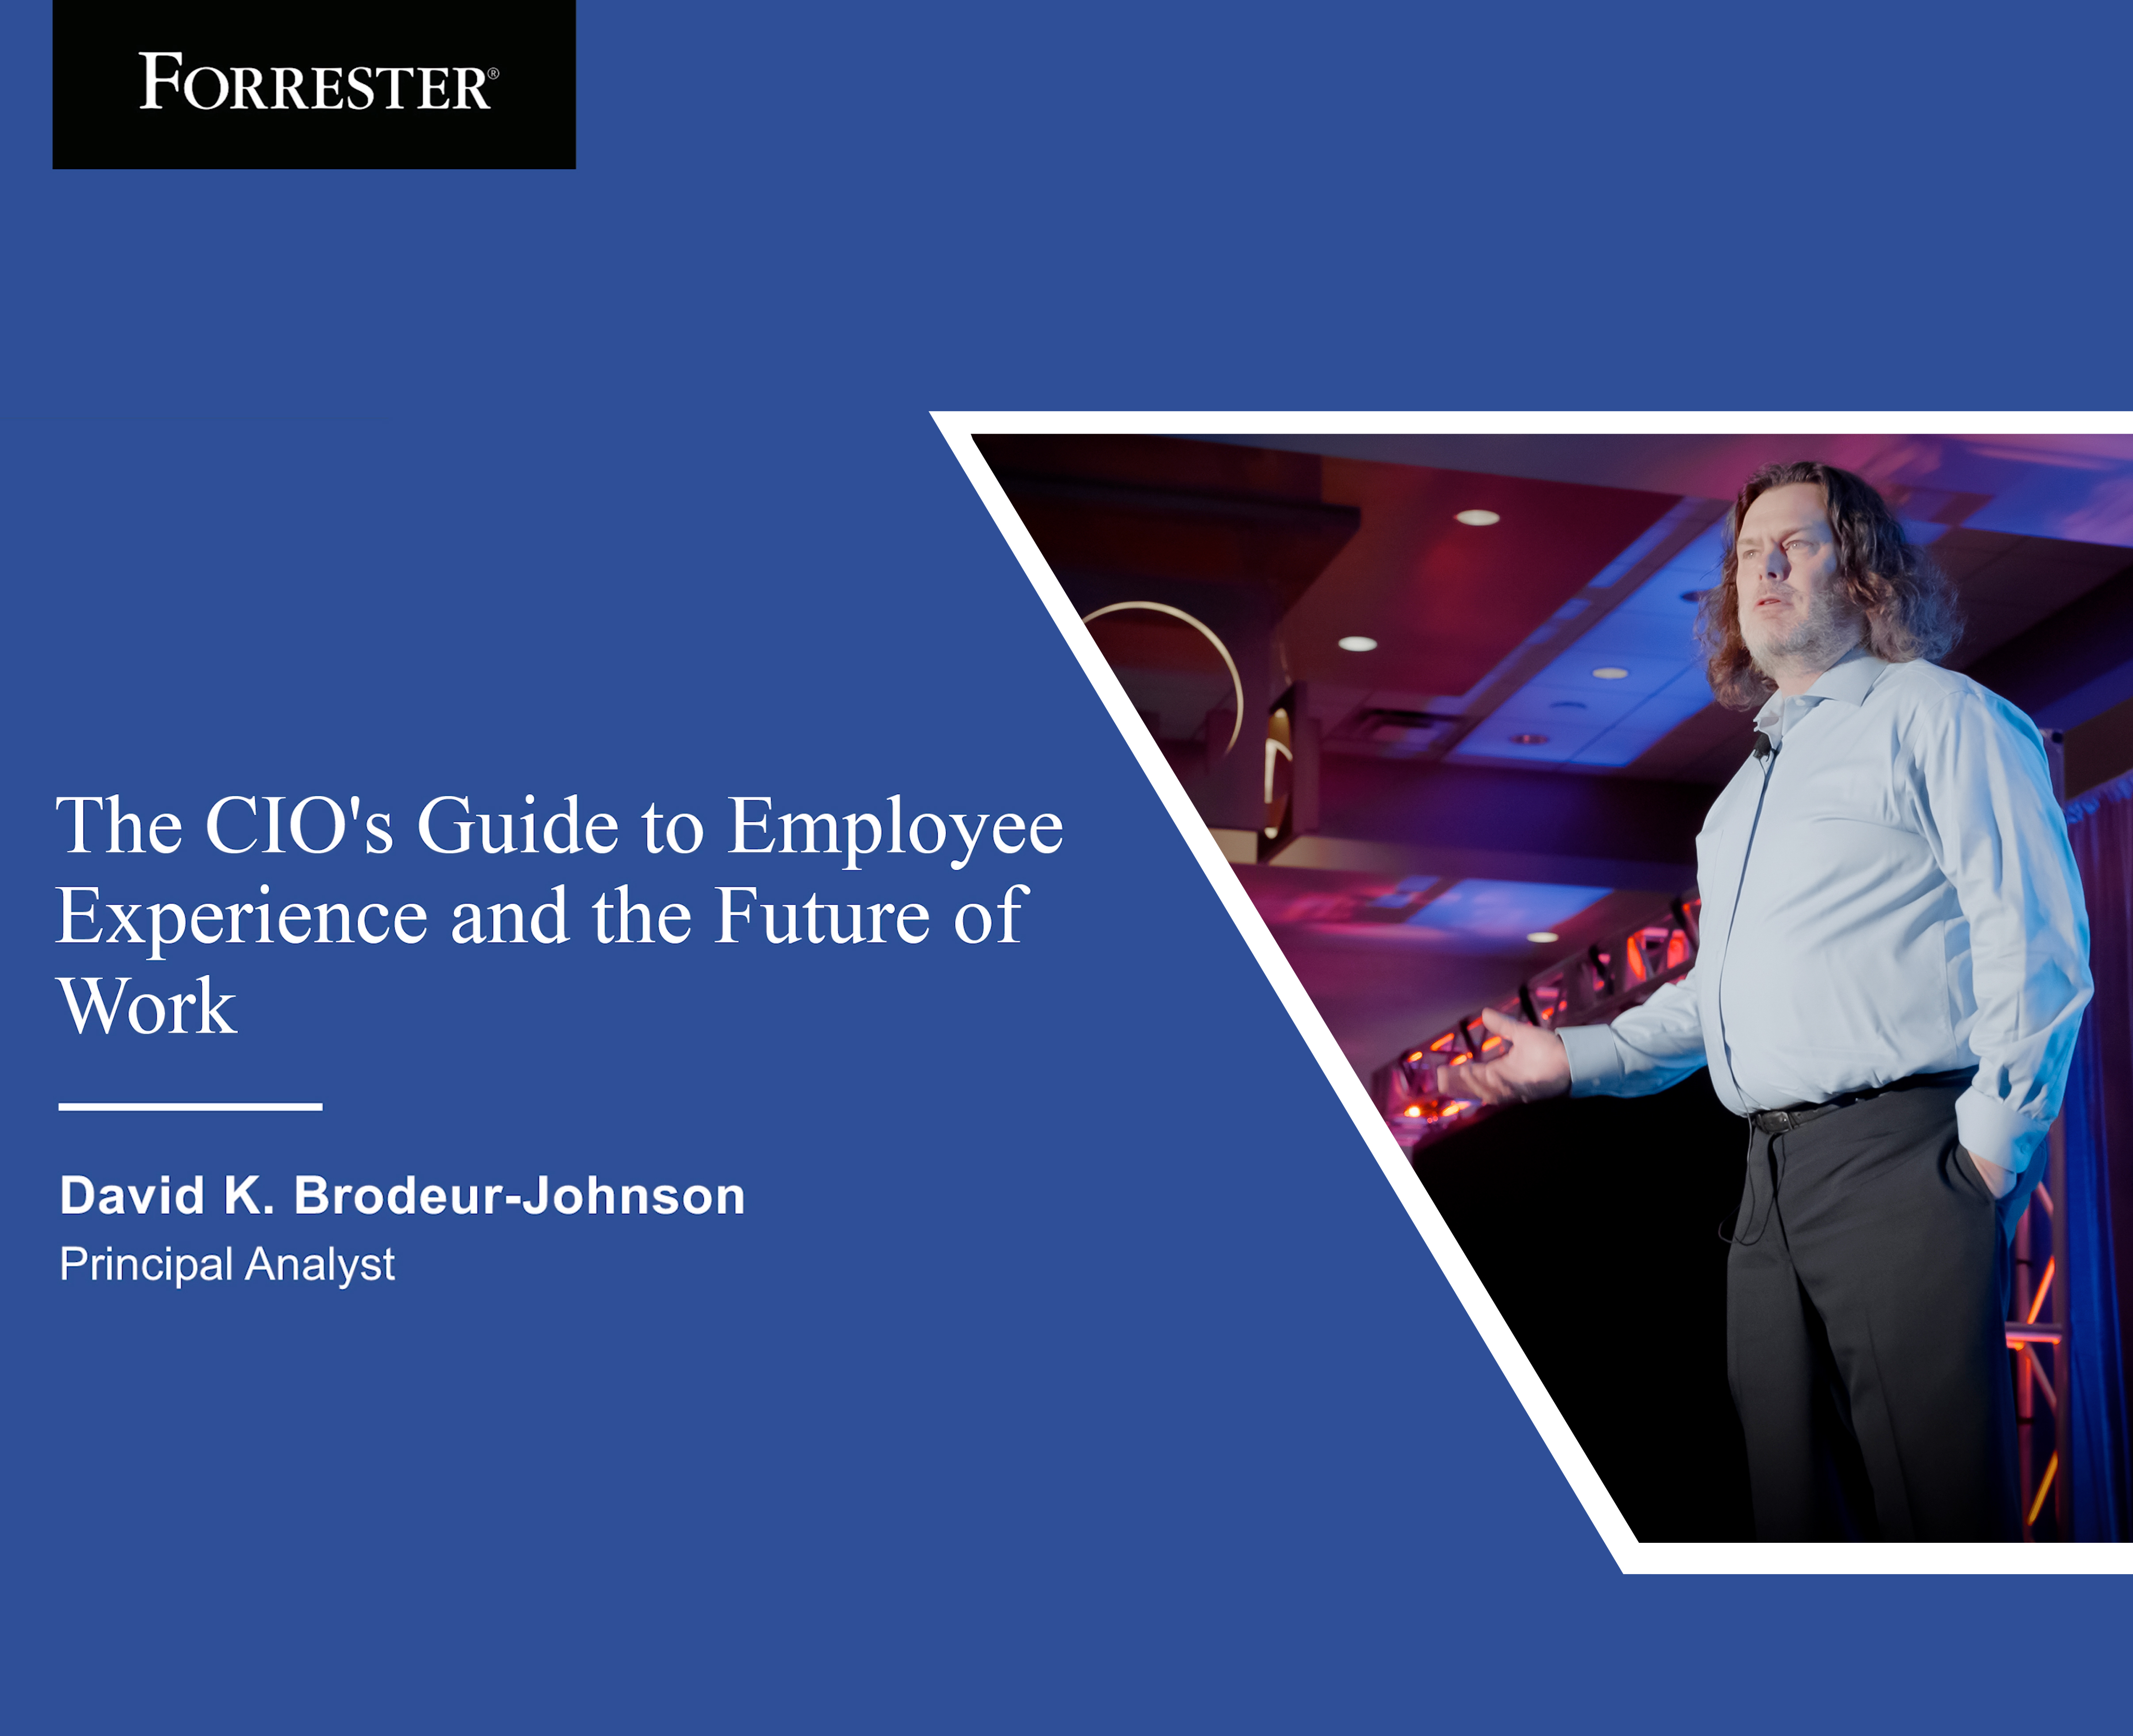 The CIO's guide to employee experience and the future of work